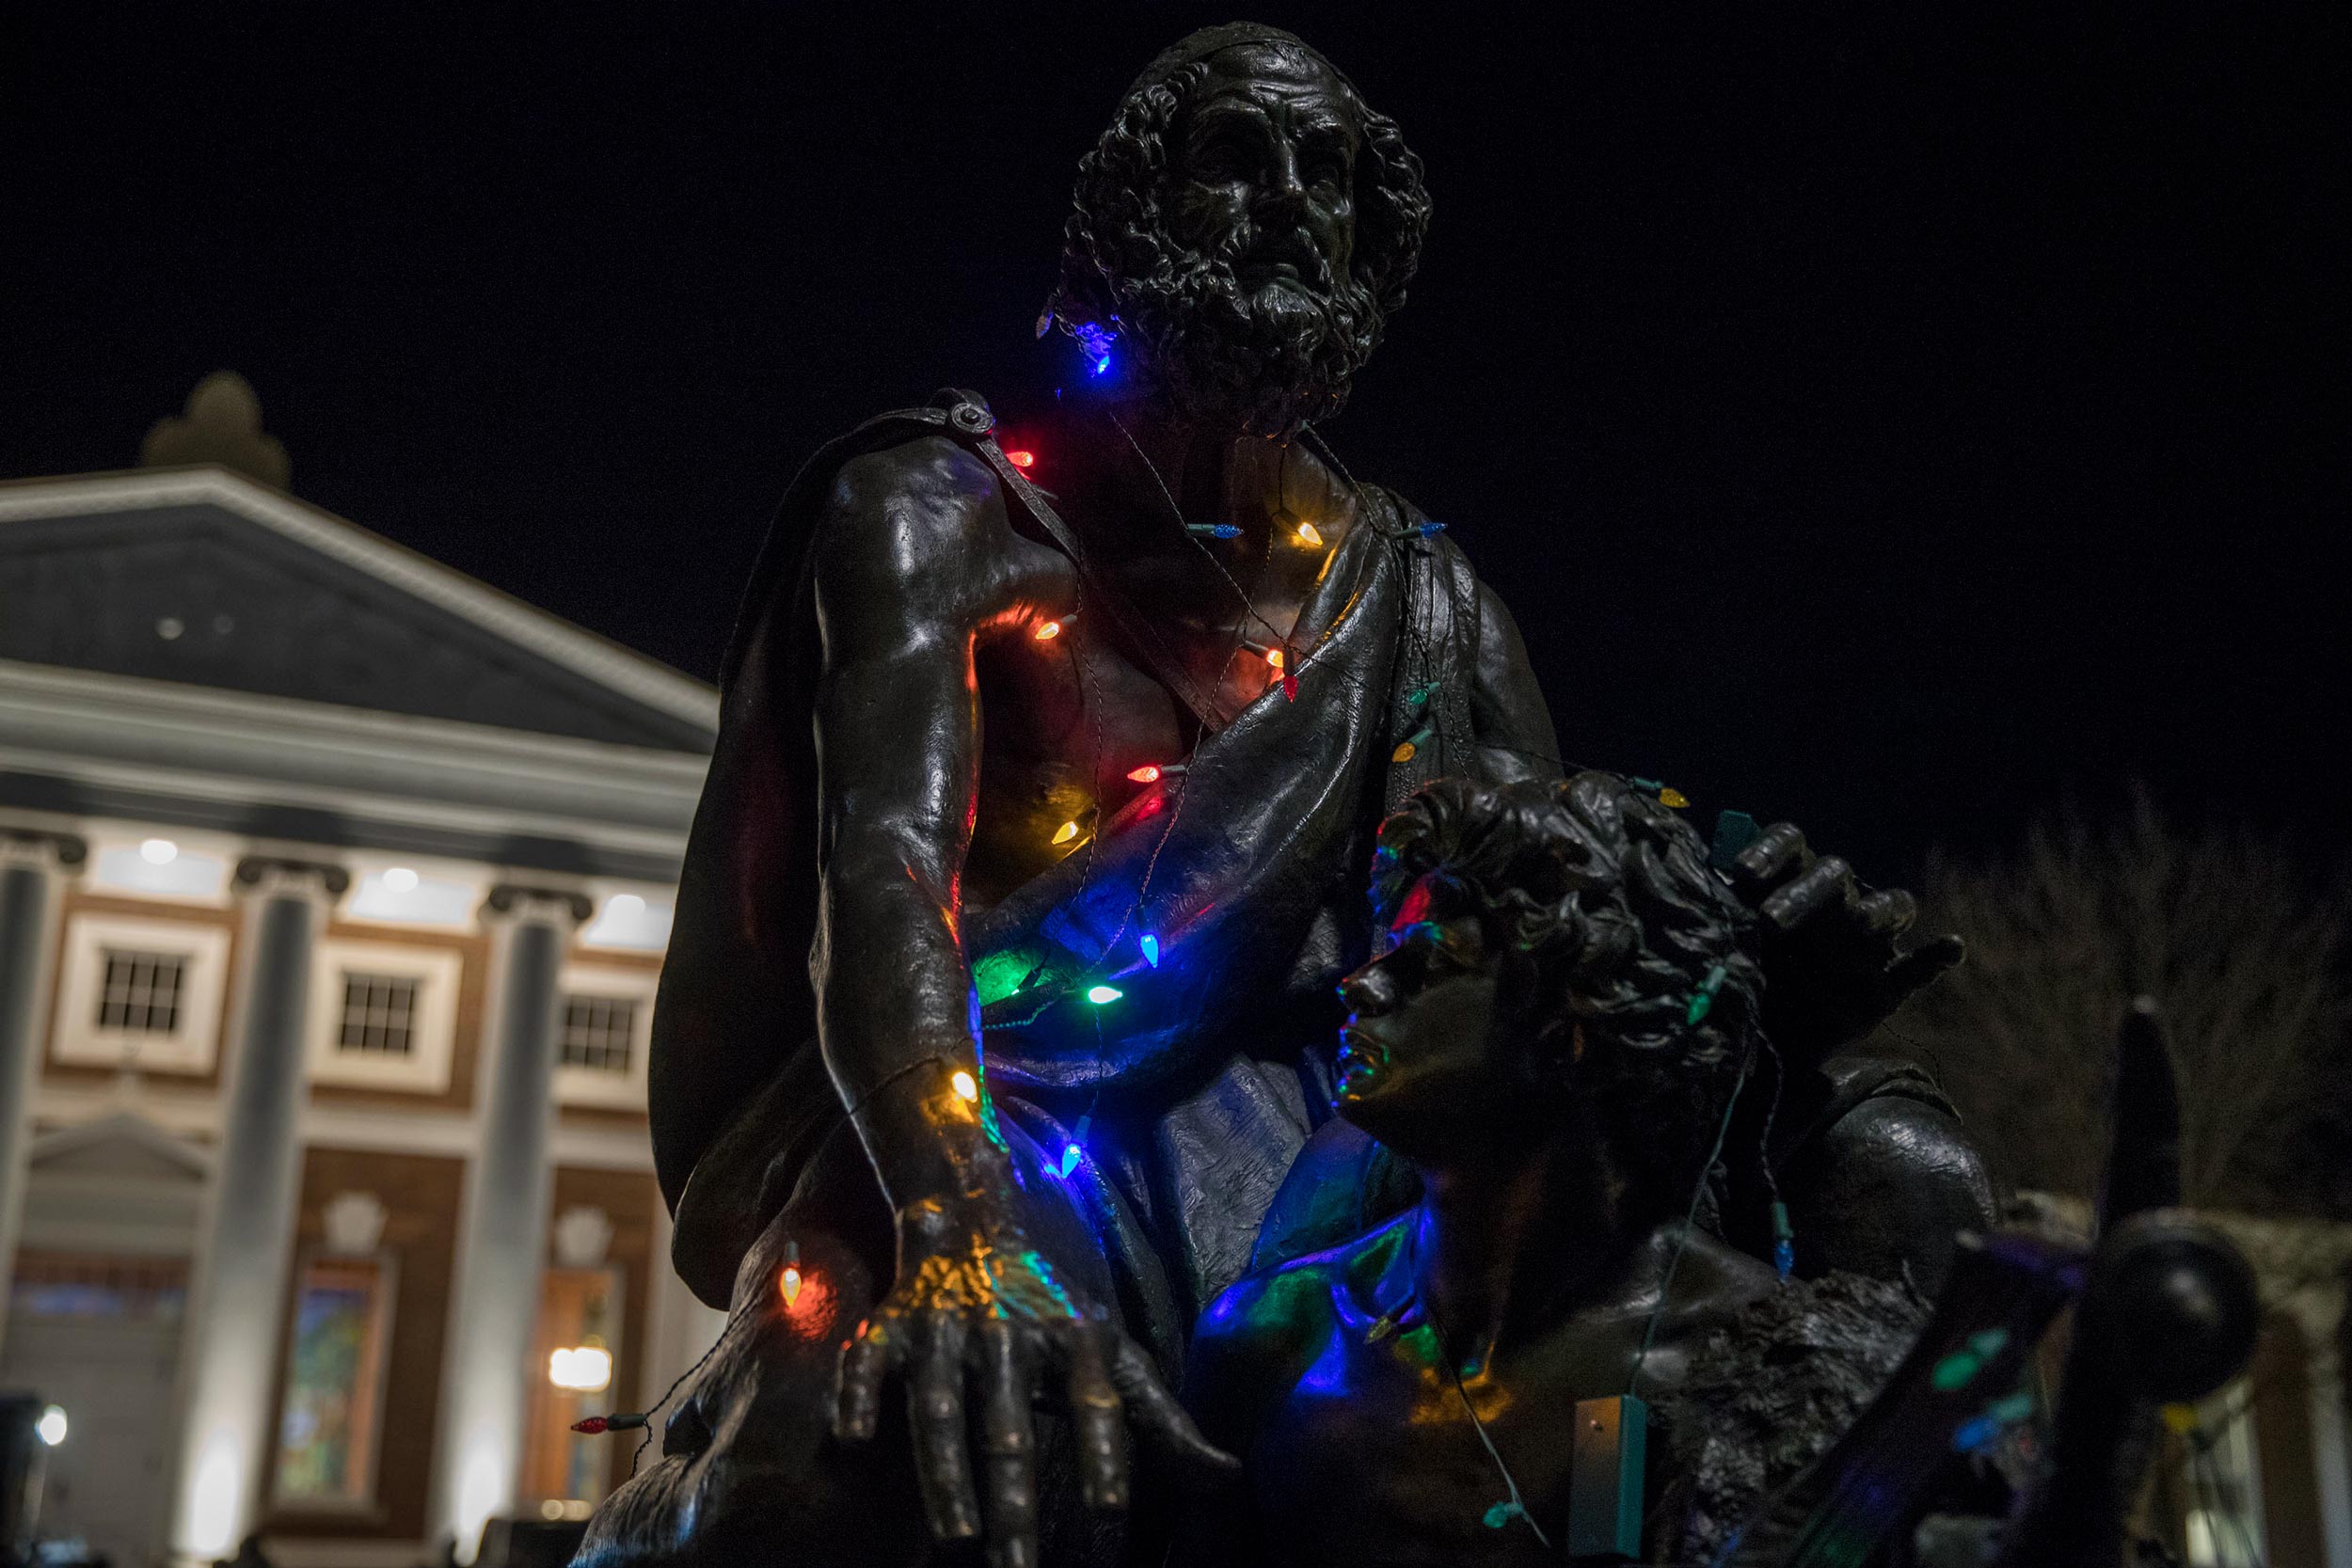 Holiday lights placed on a statue on the Lawn